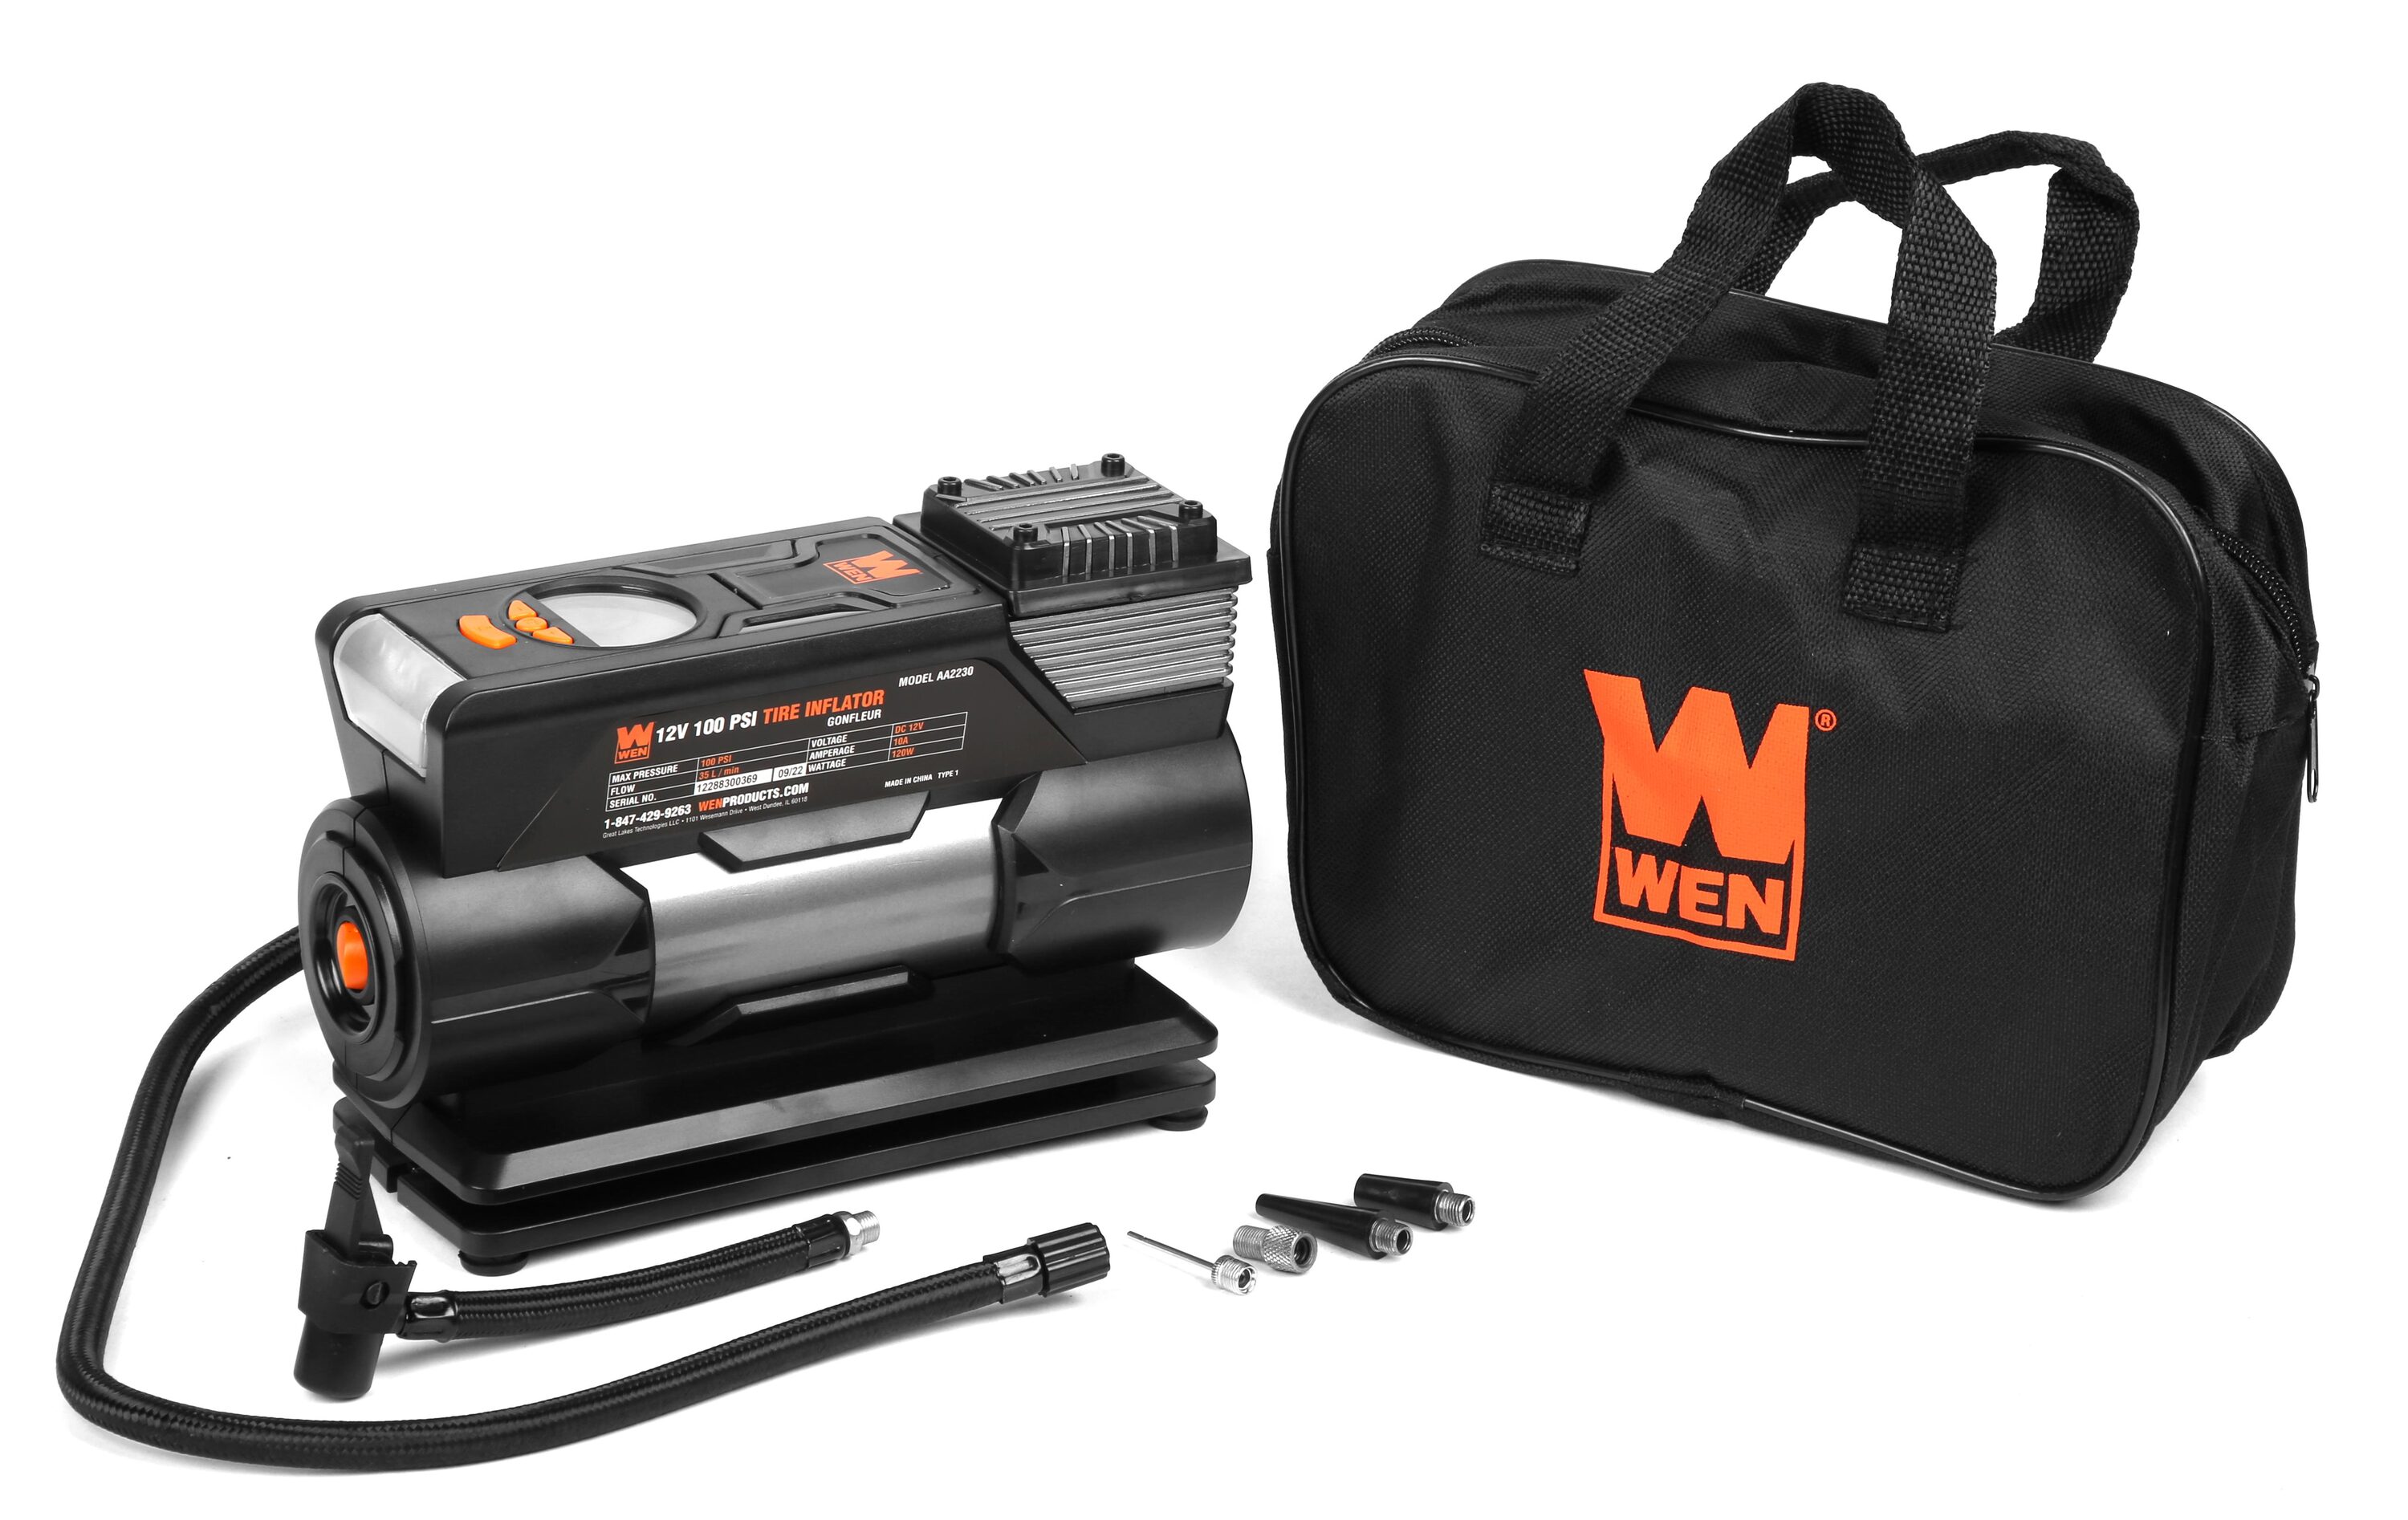 WEN AA2225 12V 90 PSI 0.8 CFM Portable Air Compressor and Tire Inflator with Carrying Case